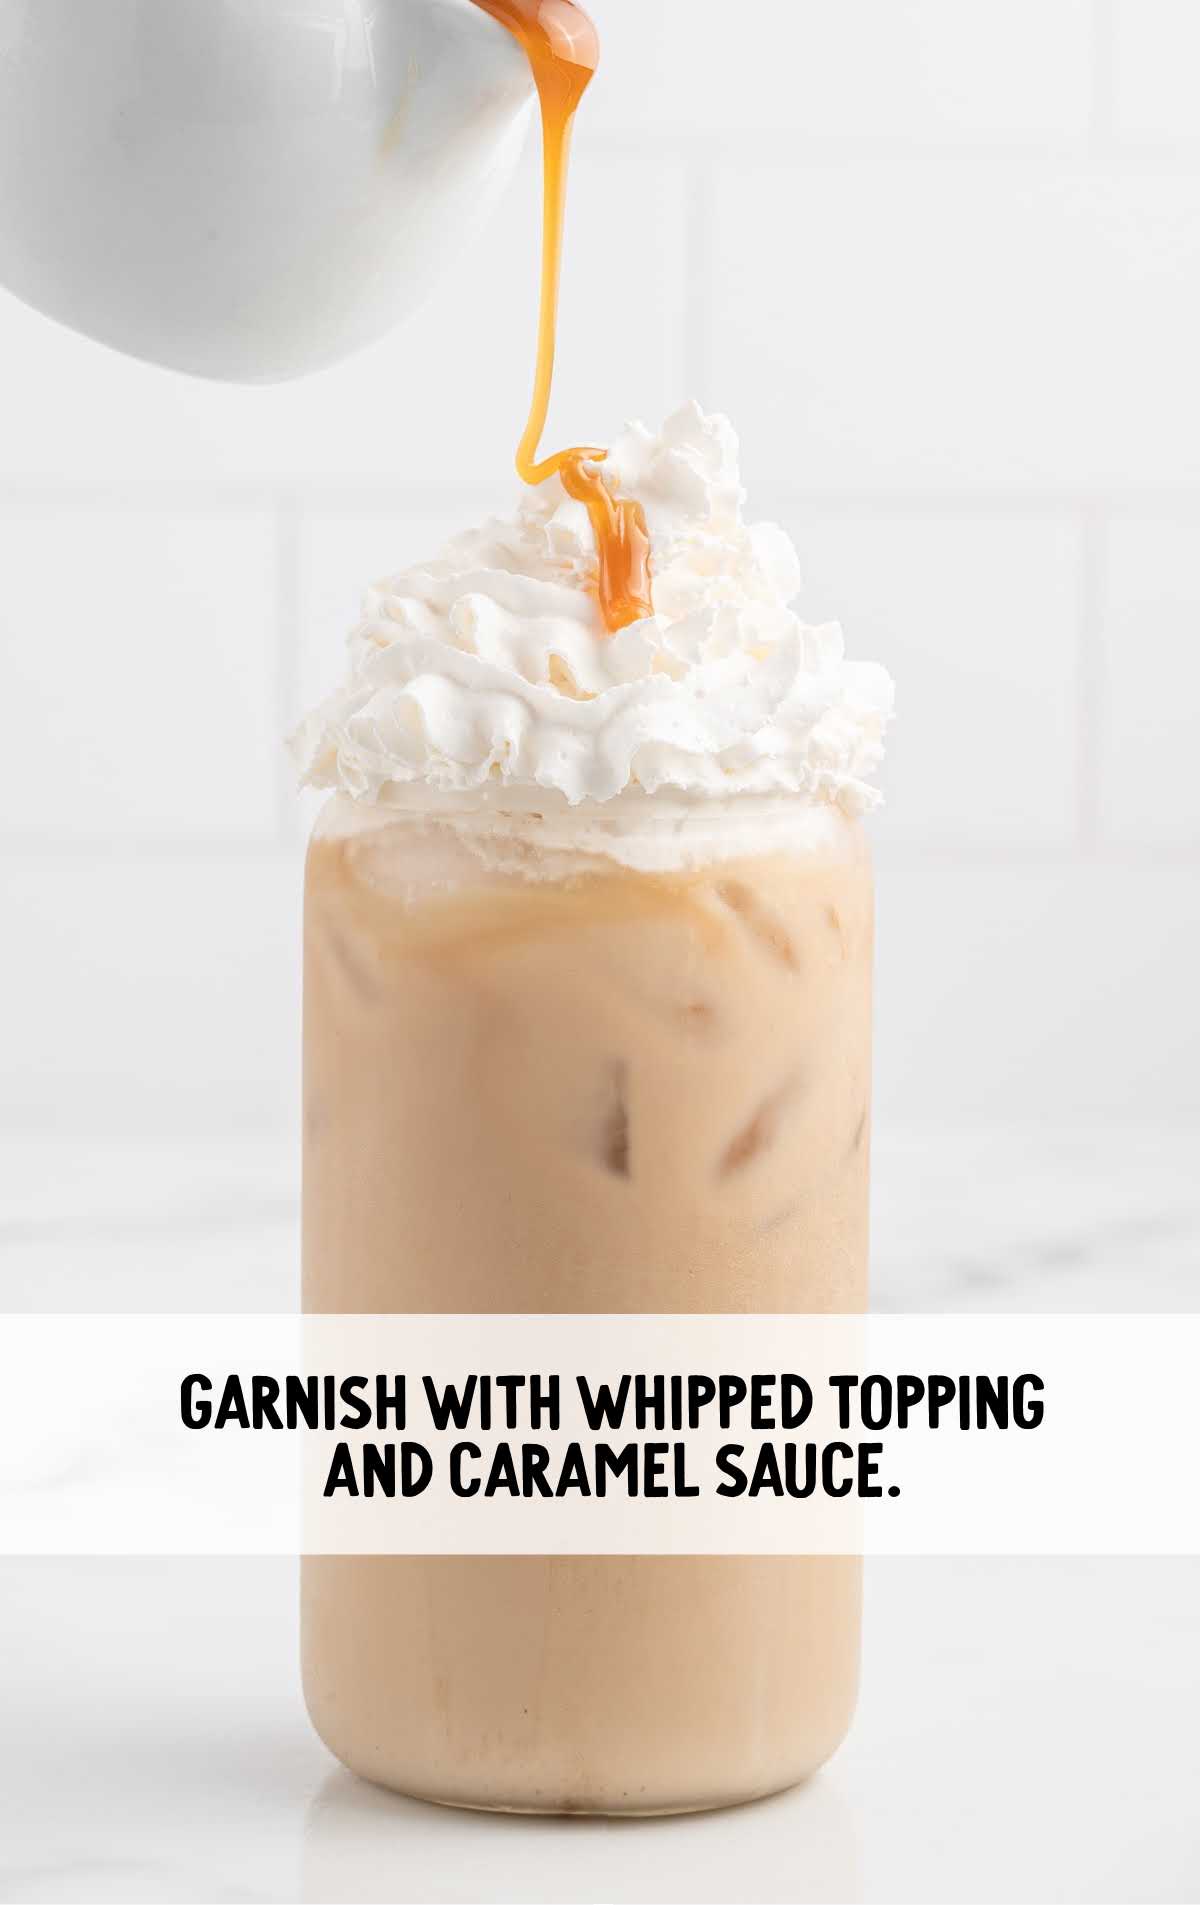 whipped topping and caramel garnished on top